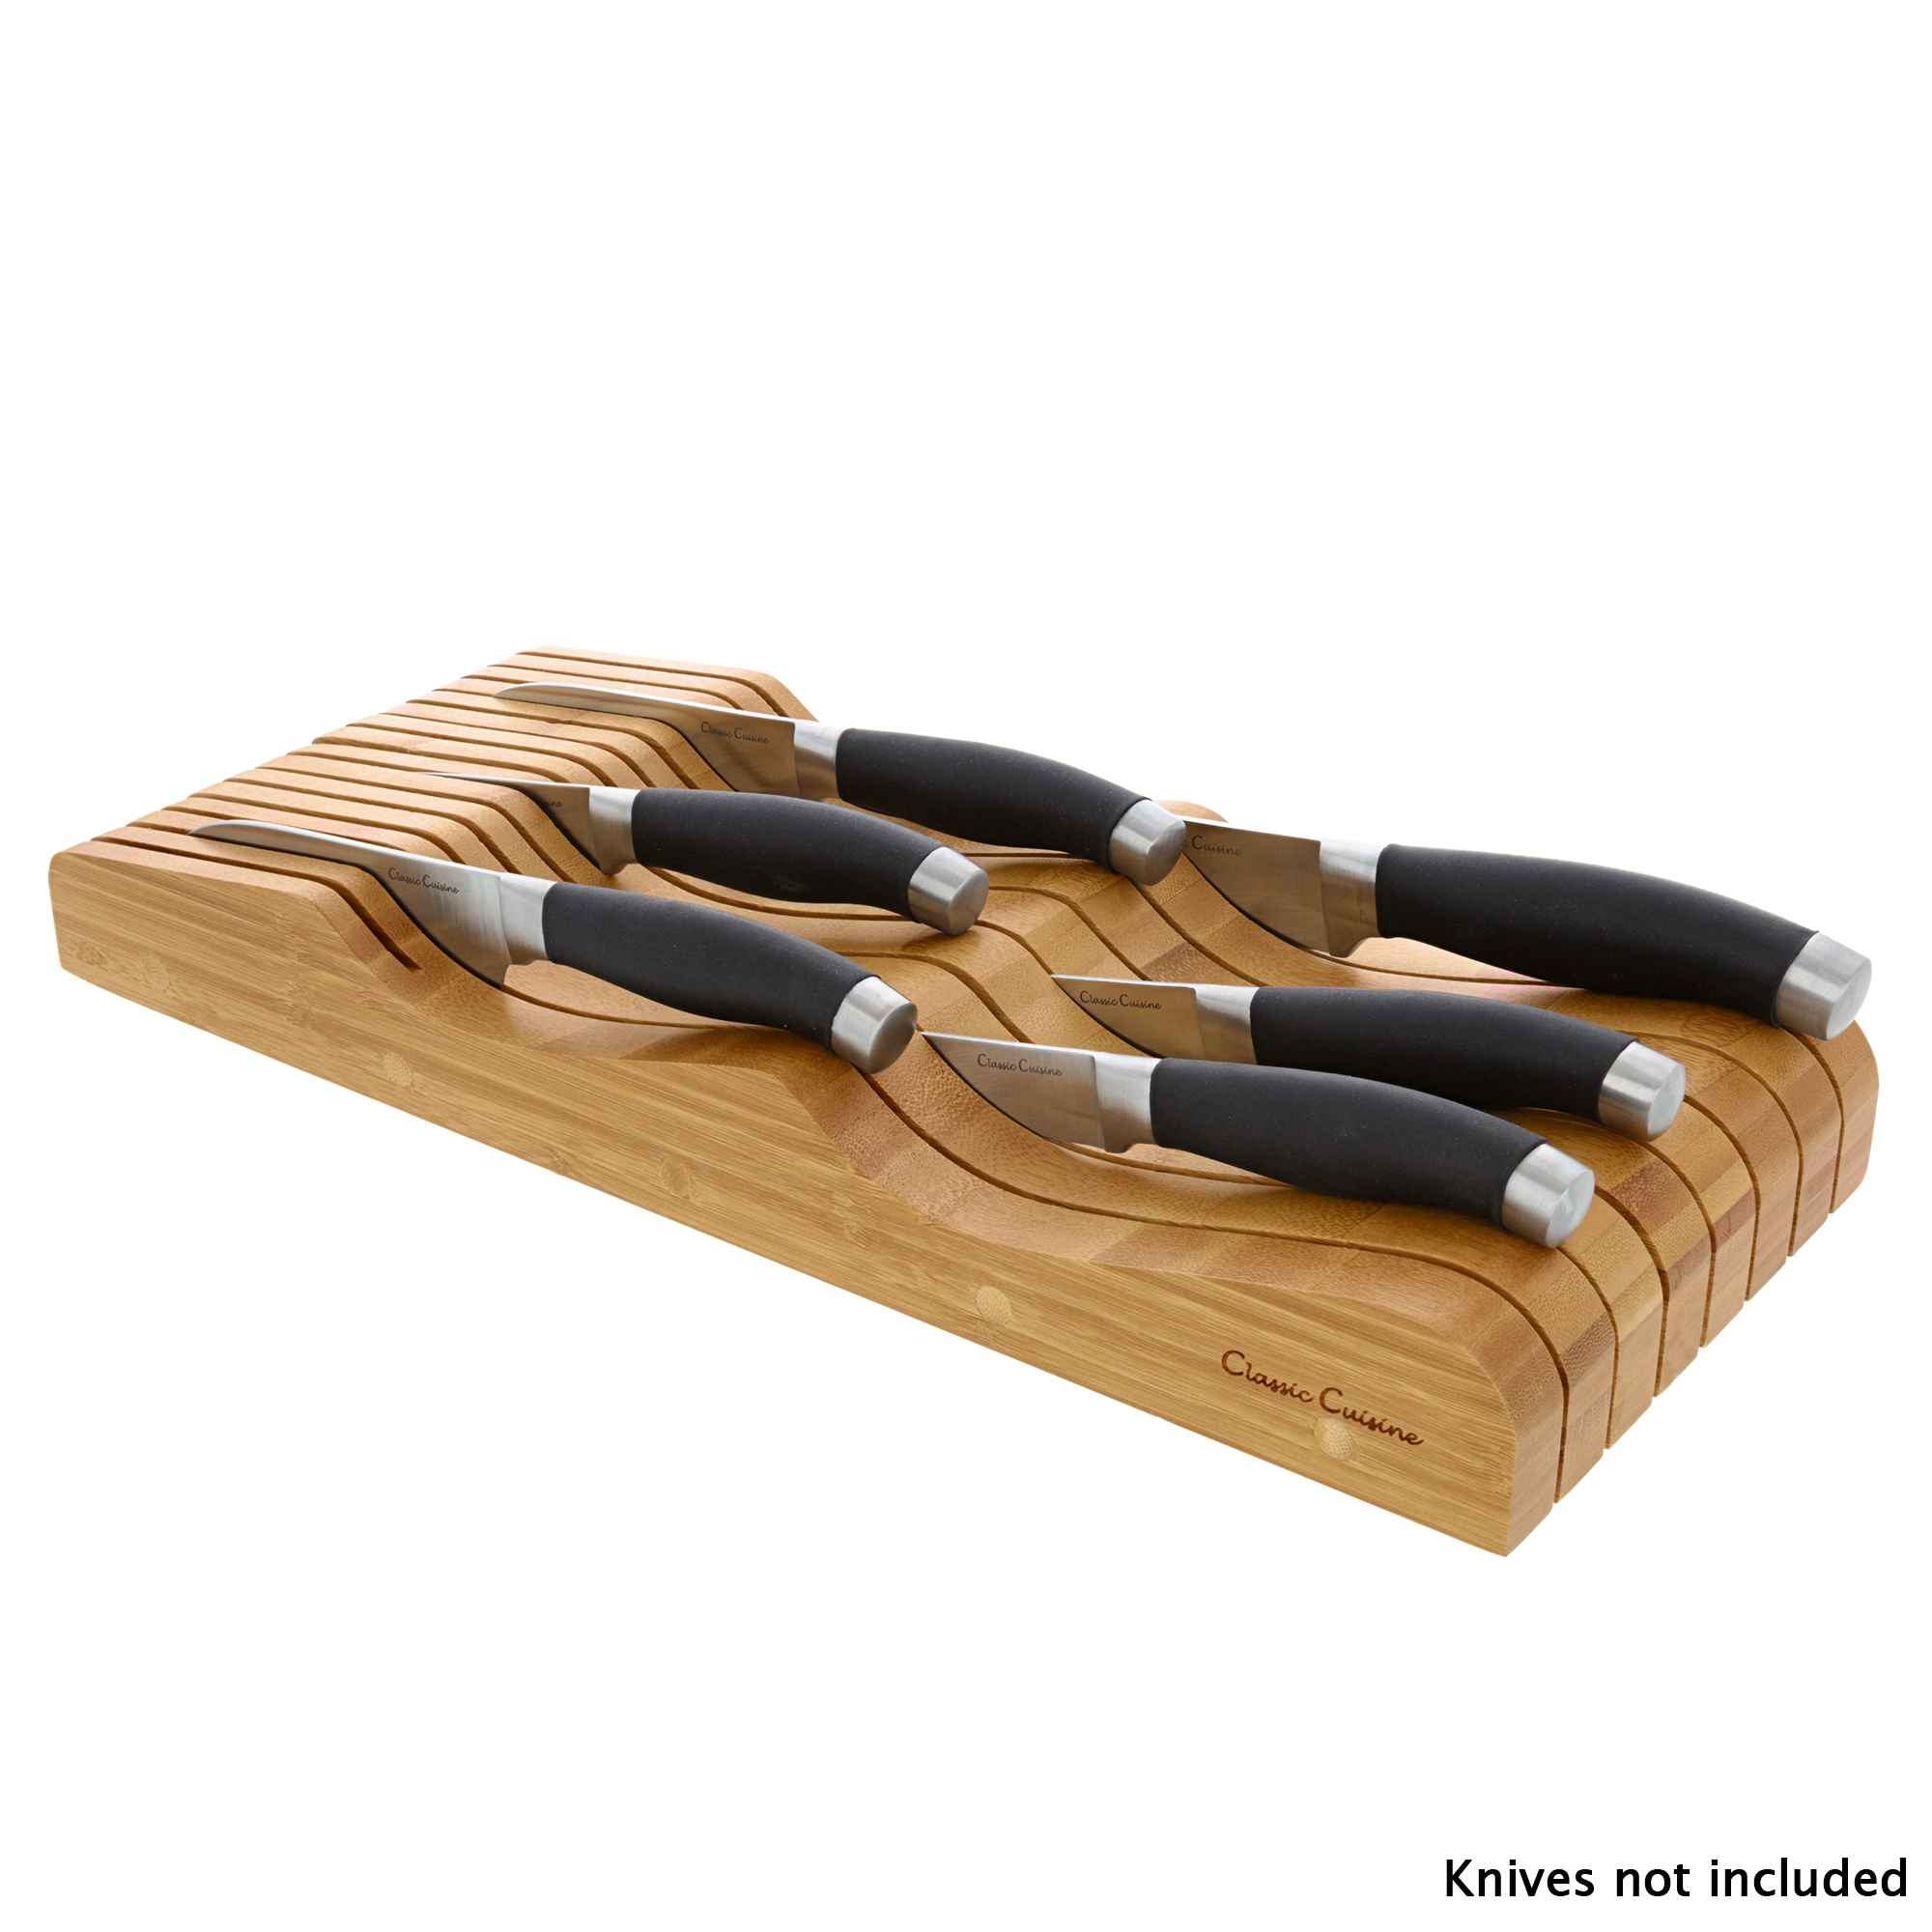 In Drawer Bamboo Knife Block and Cutlery Storage Organizer, Holds up to 15 Knives Bacteria Resistant